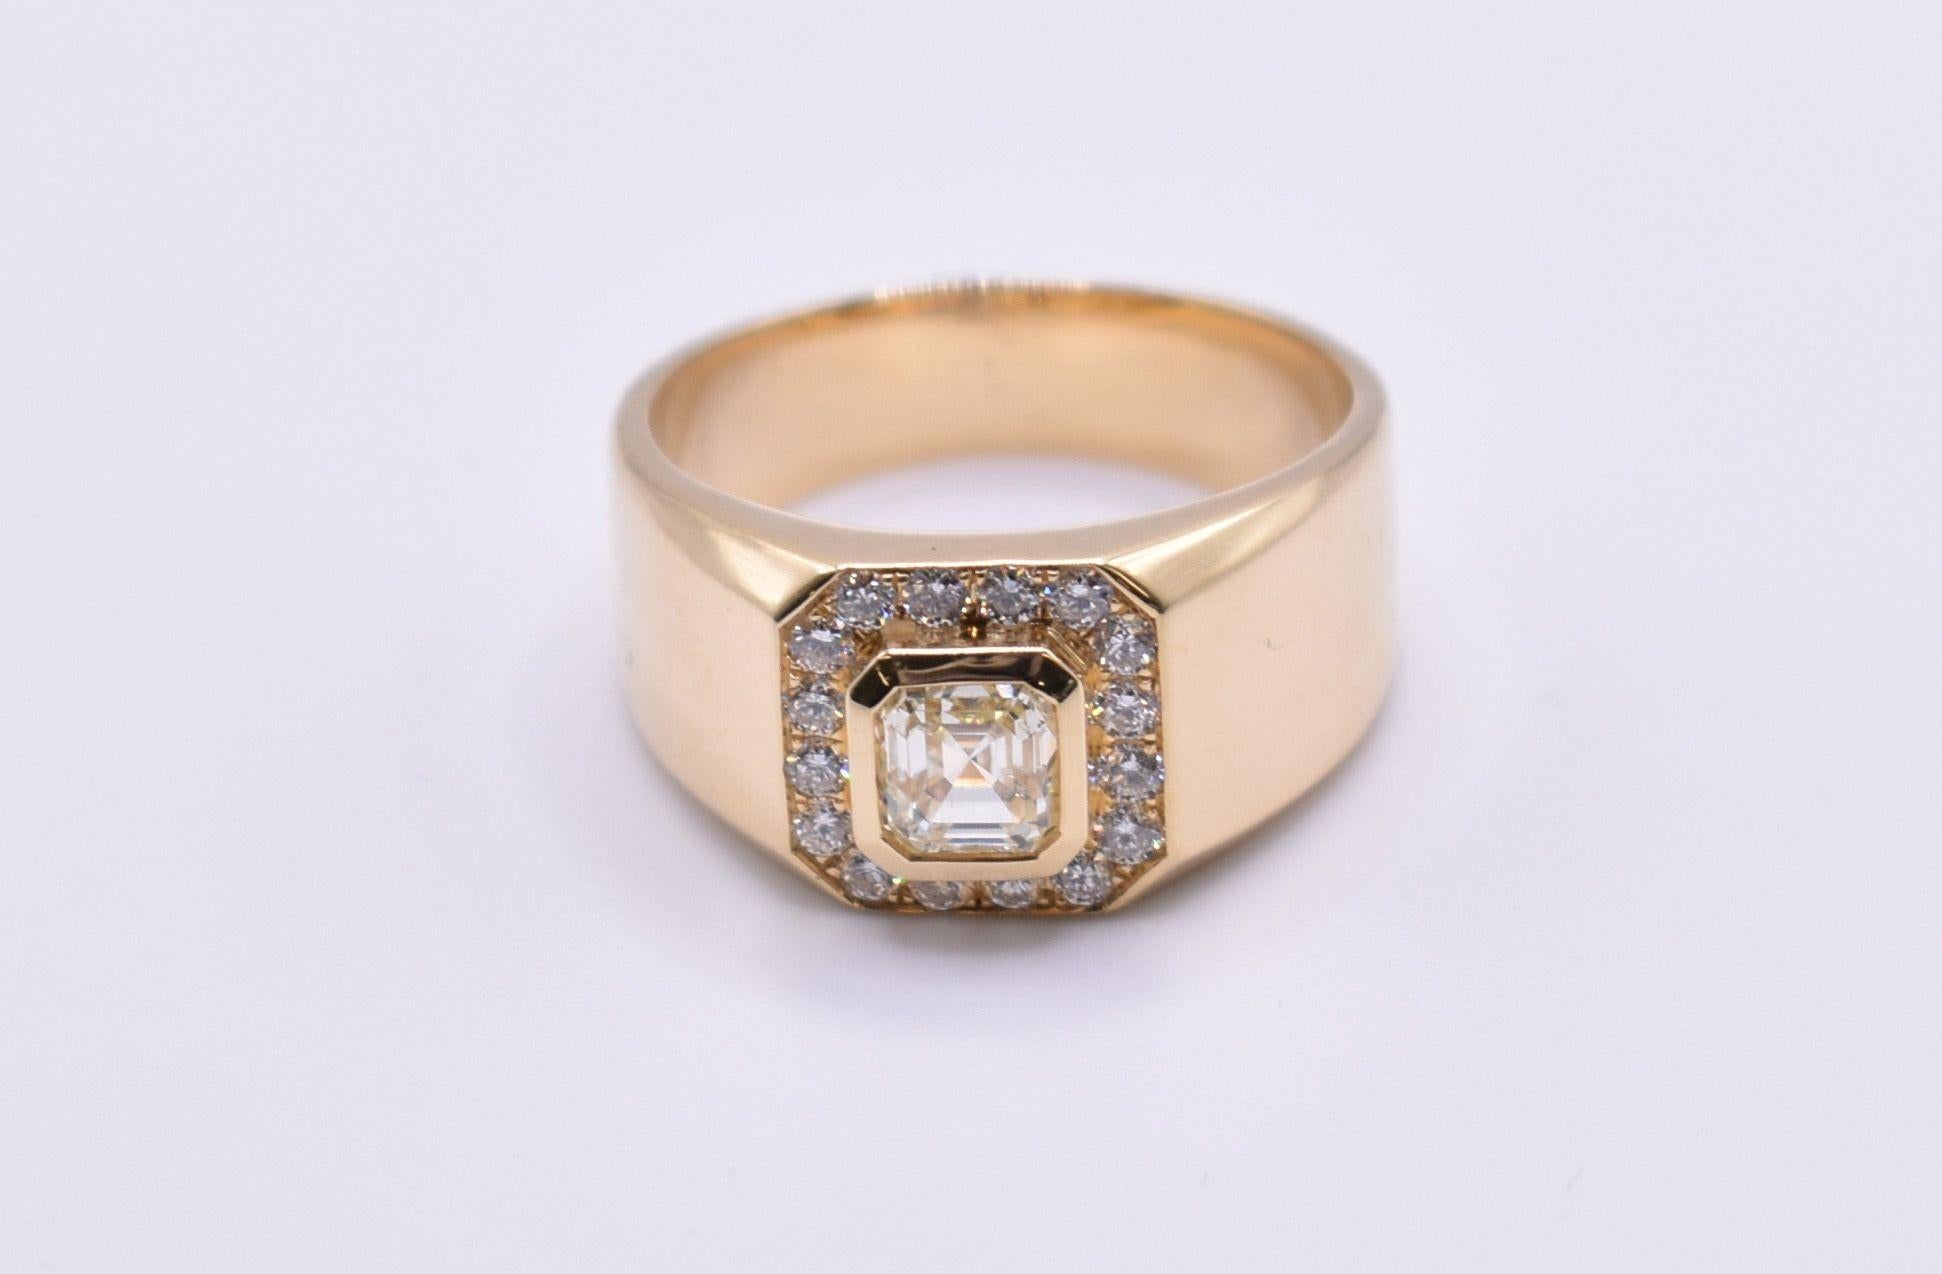 A wonderful 18k yellow gold square emerald cut diamond ring, having a 1.01ct emerald cut diamond to the centre, surrounded by small 0.29ct diamonds. K/L colour. Total weight: 10.5g

RRP: £5,995